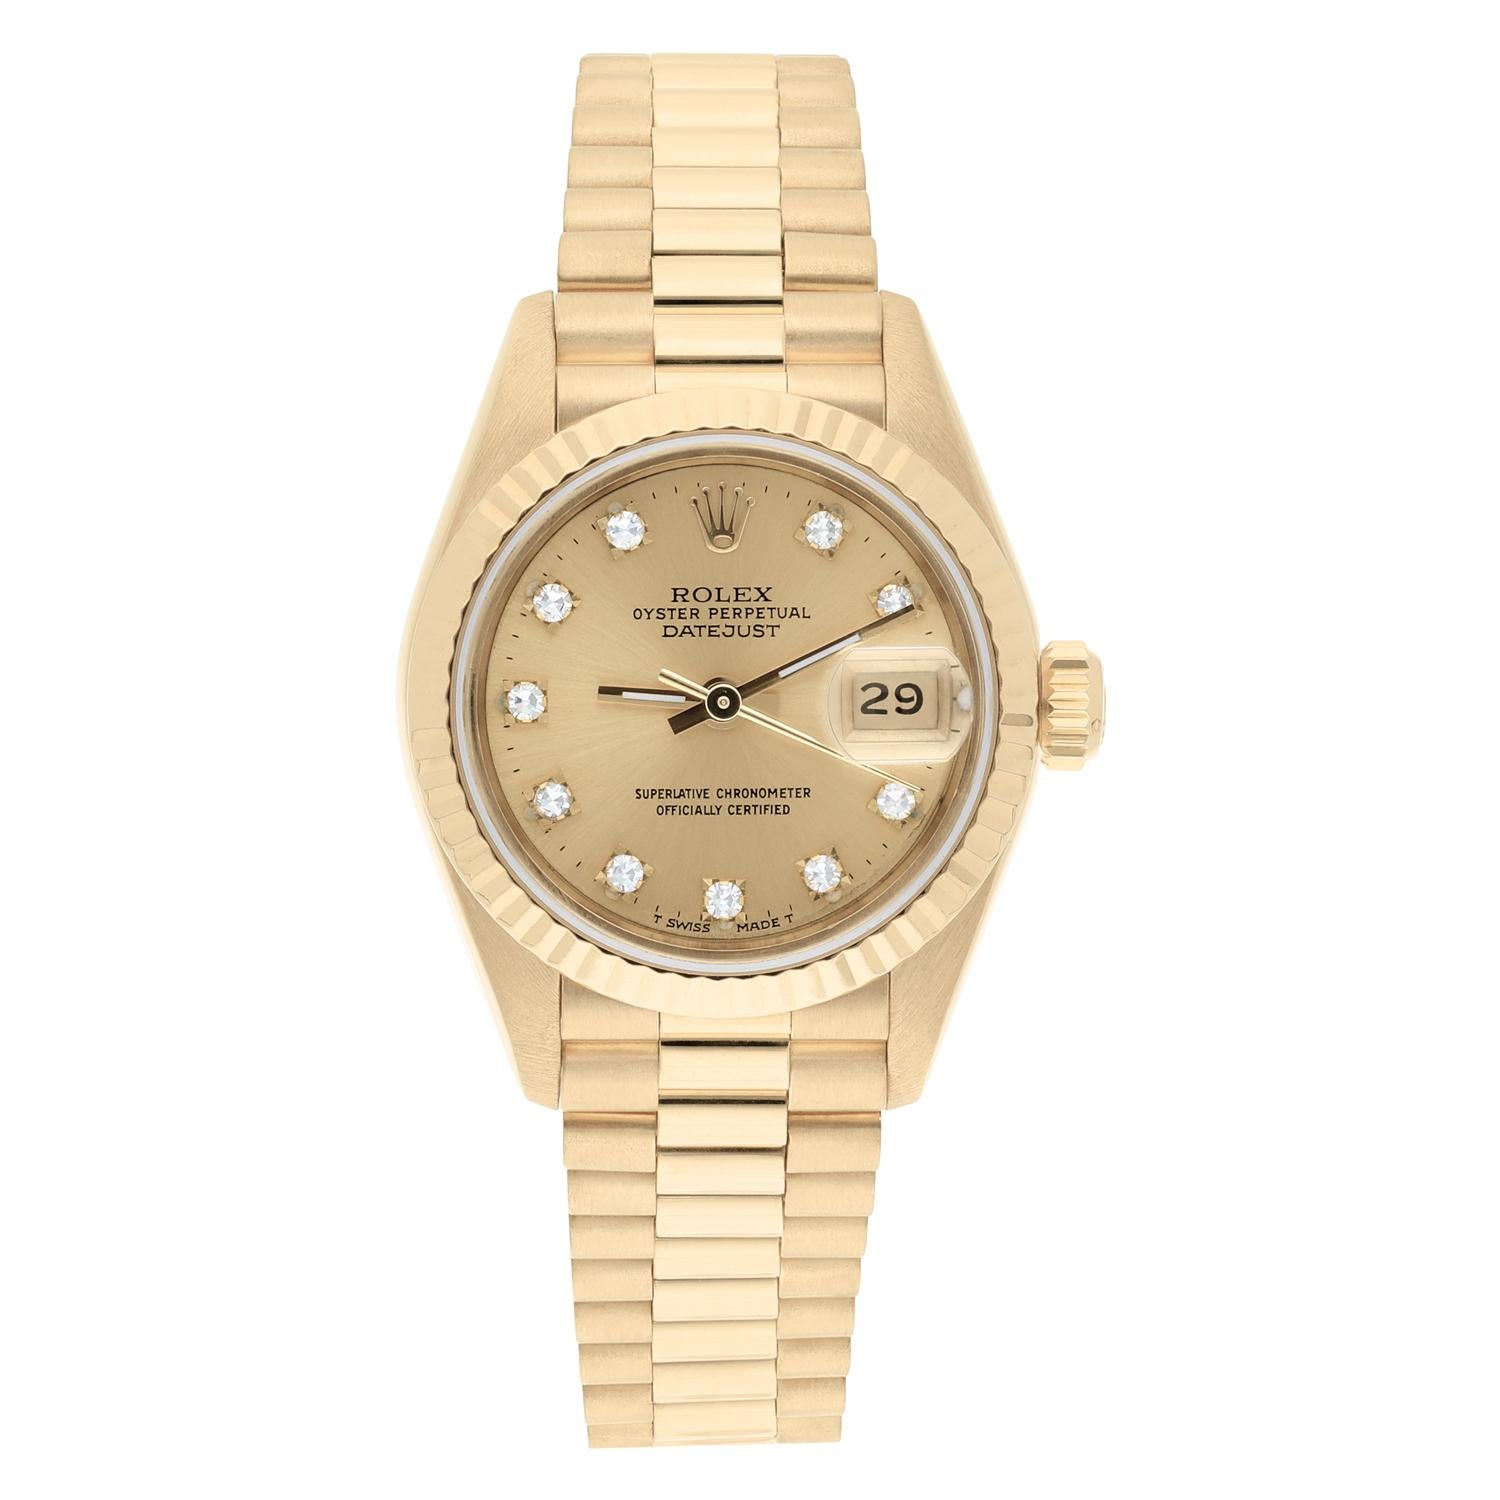 Experience timeless elegance with the 1993 ladies Rolex Datejust. Crafted in radiant 18K yellow gold and featuring a captivating champagne diamond dial, this timepiece exudes enduring allure.Watch is accompanied by its original box and papers,as